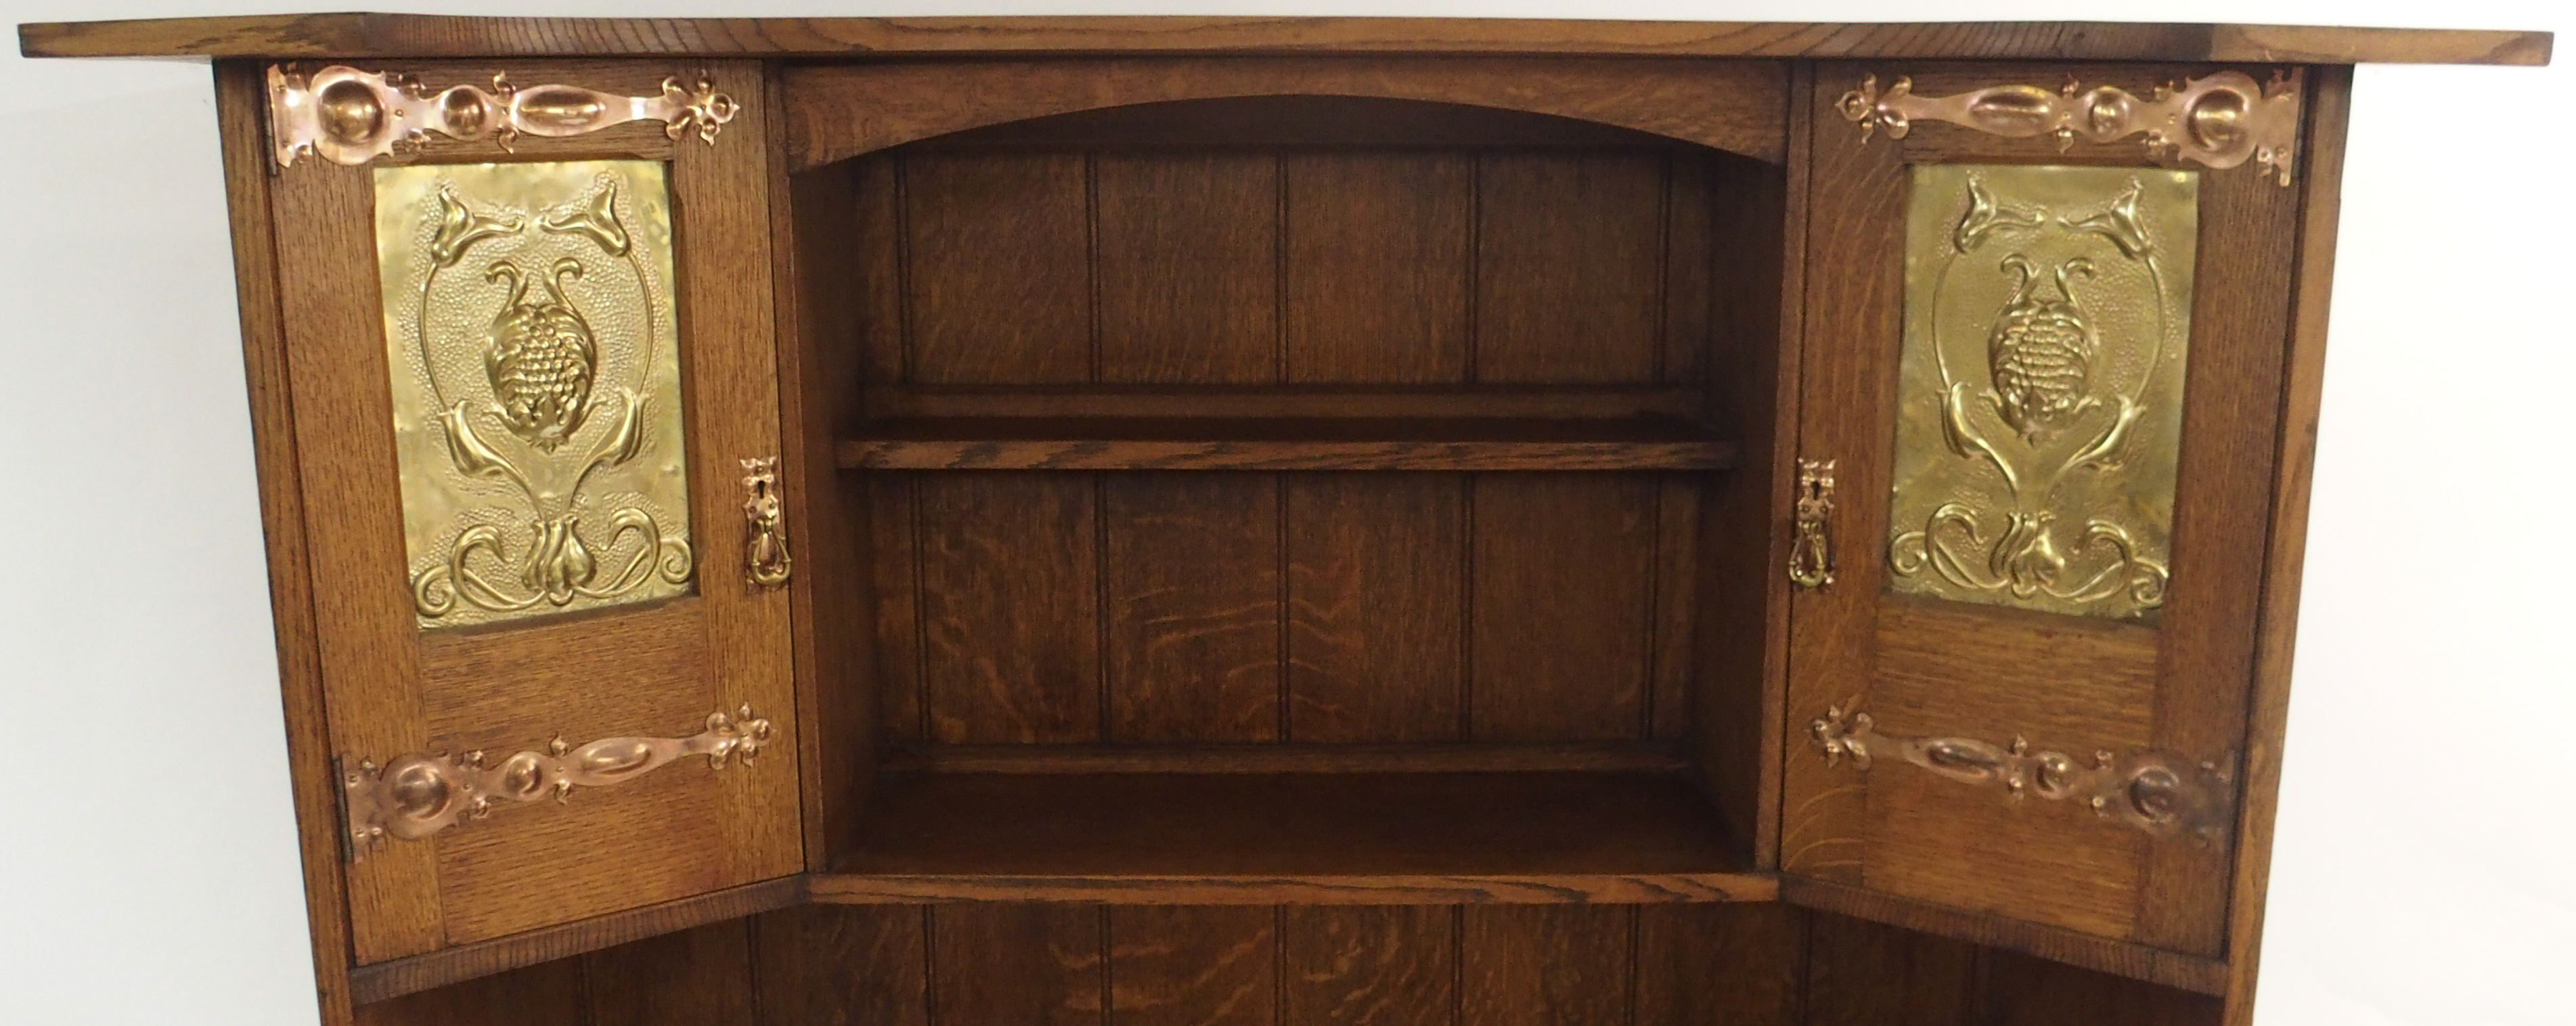 AN ARTS AND CRAFTS OAK DRESSER with open shelves, flanked by embossed inset brass panels and - Image 4 of 15